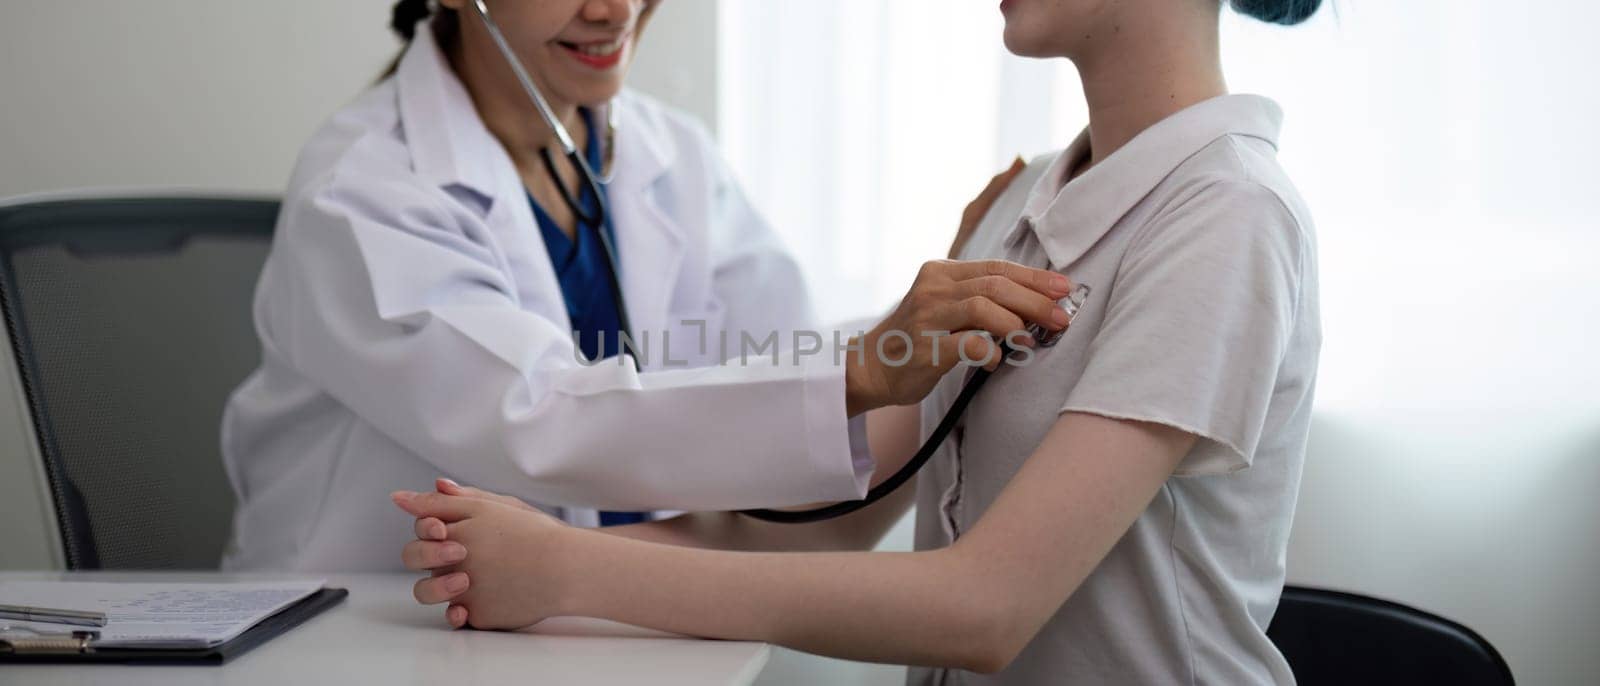 Asian woman elderly doctor at hospital taking care of young woman. Doctor measure heart rate by stethoscope on older patient. Medical insurance service concept by nateemee